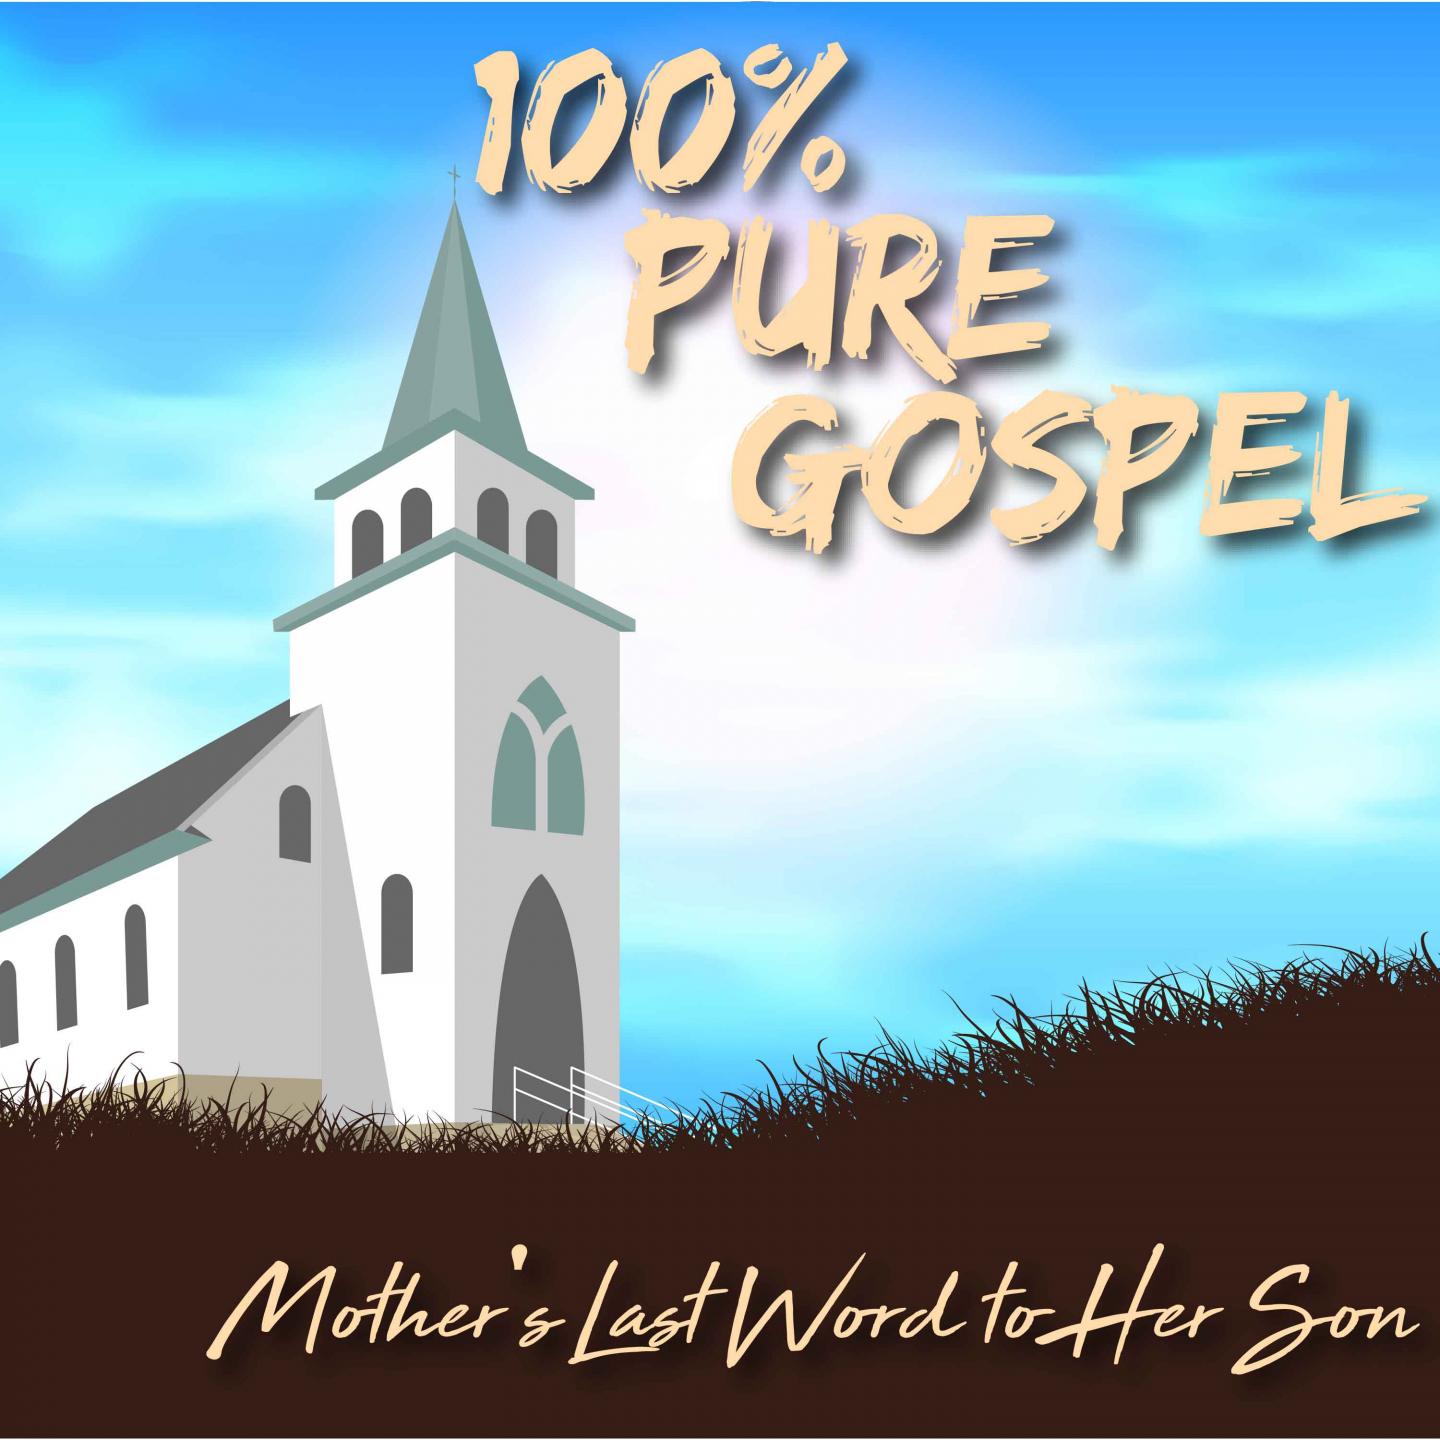 100% Pure Gospel / Mother's Last Word to Her Son